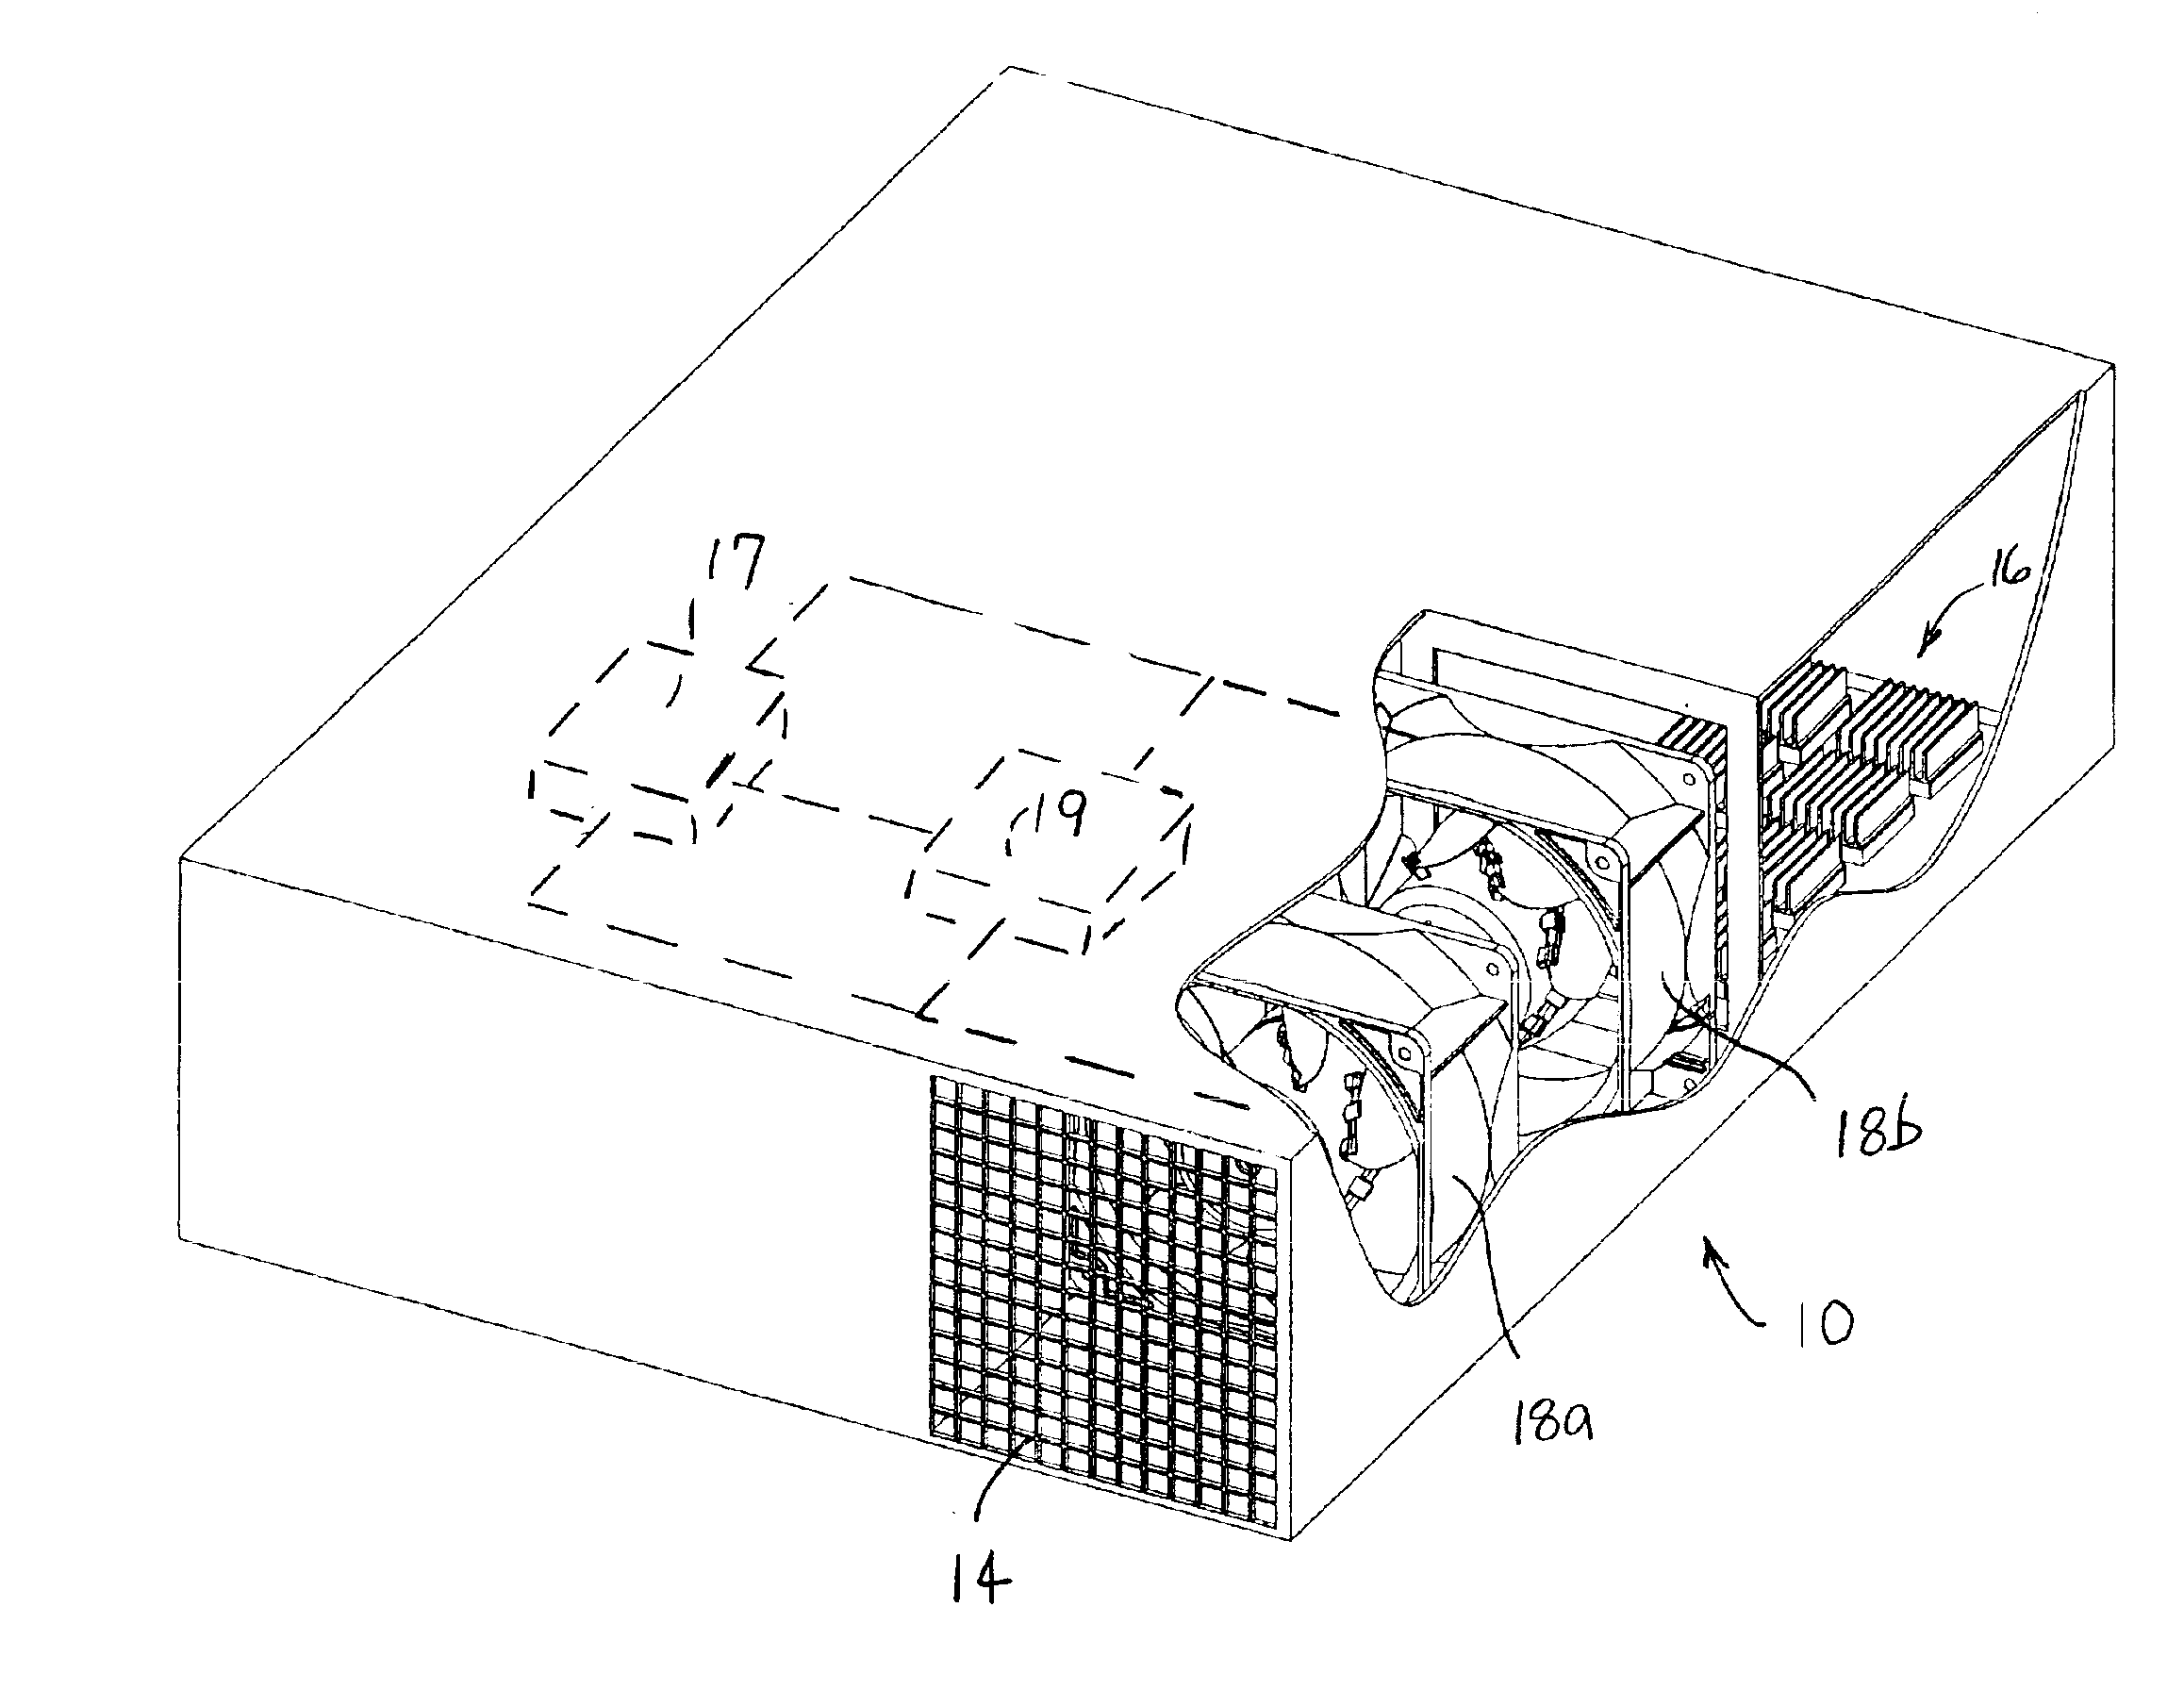 Fan with collapsible blades, redundant fan system, and related method